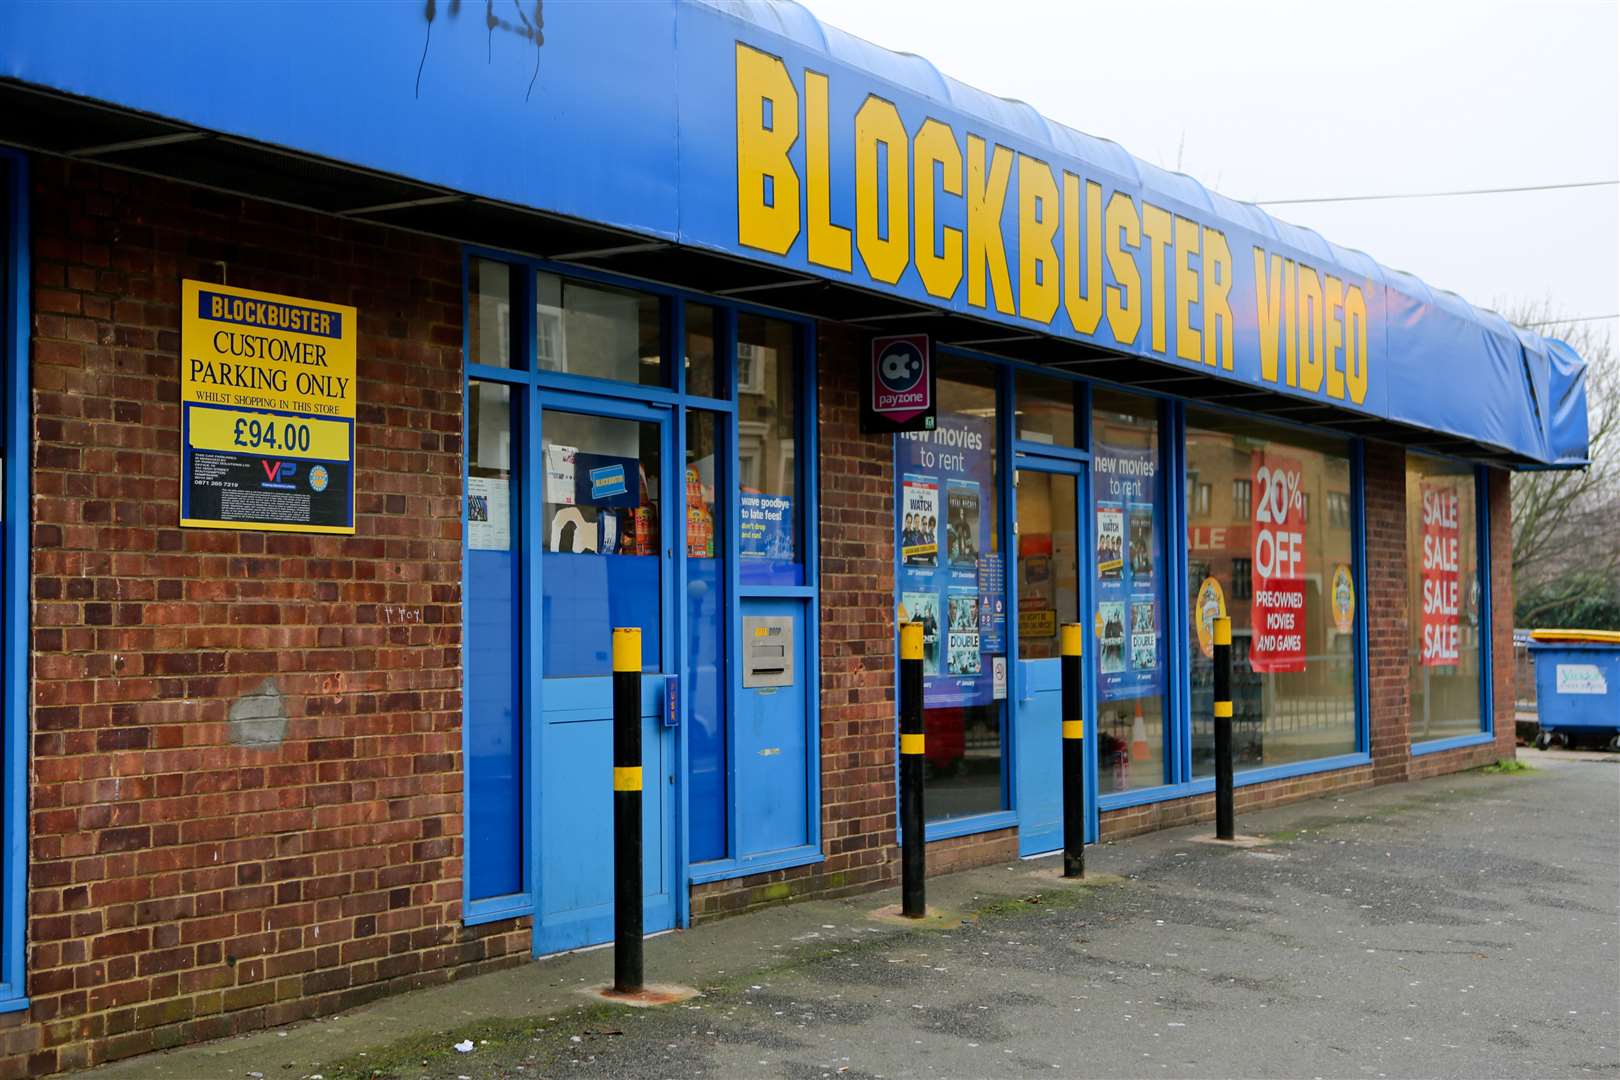 The Blockbuster Video in Gravesend closed in 2013